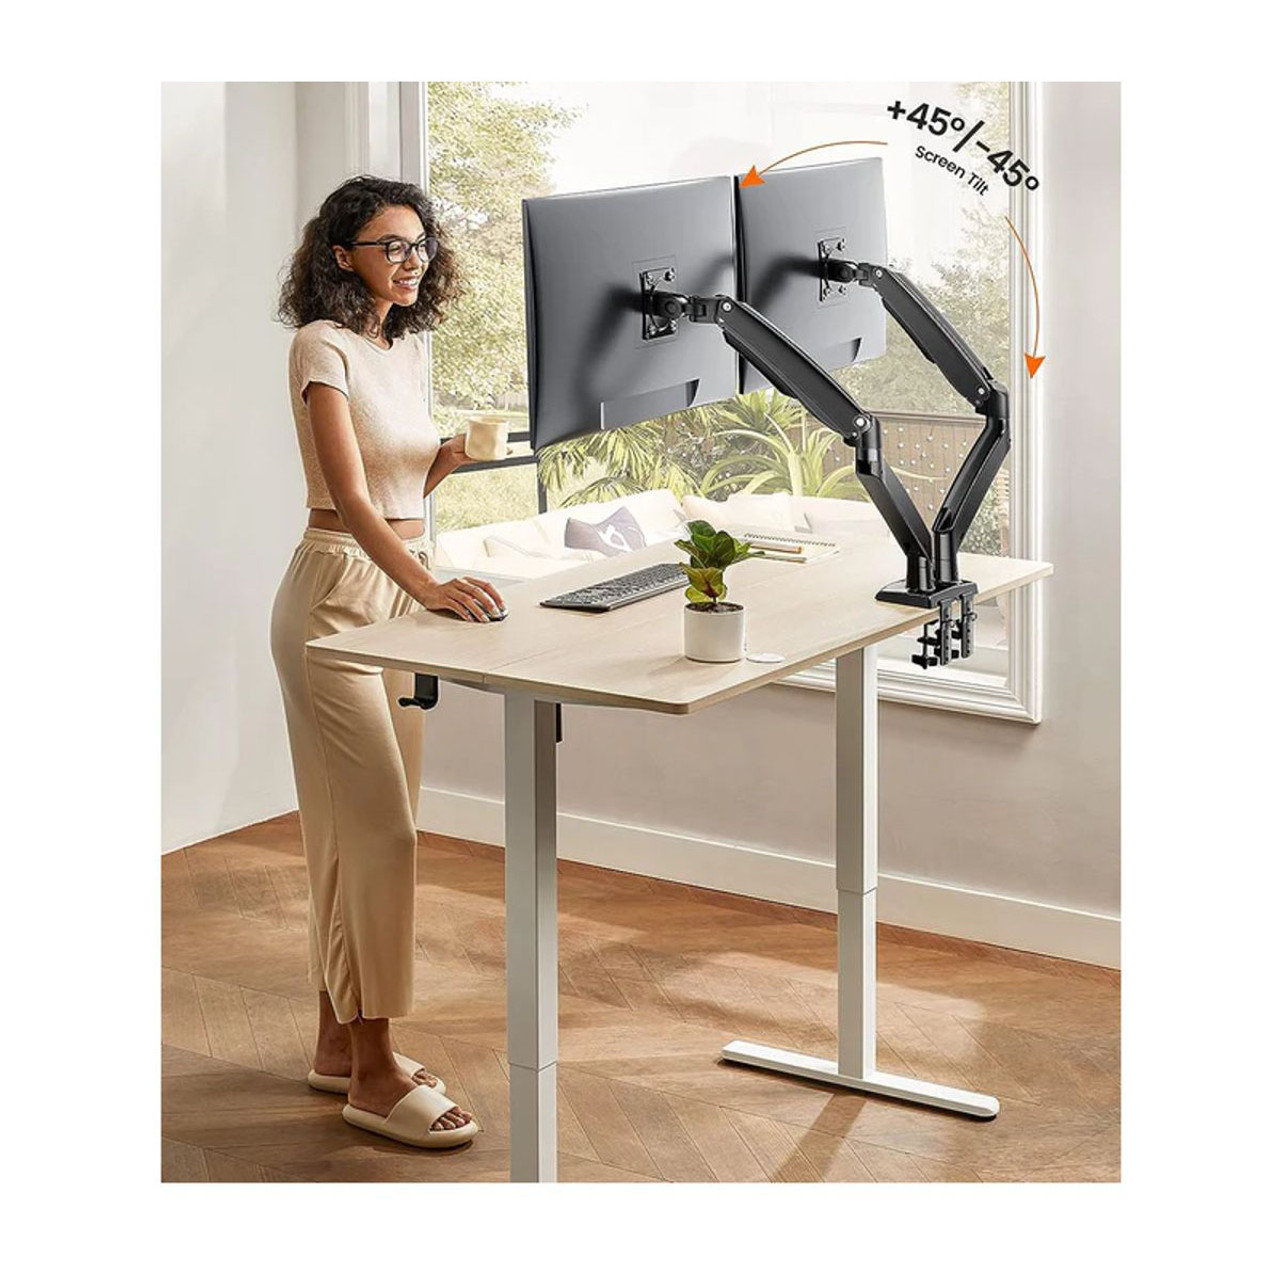 Ergear® Fully Adjustable Dual Monitor Arm with USB for Screens up to 35" product image